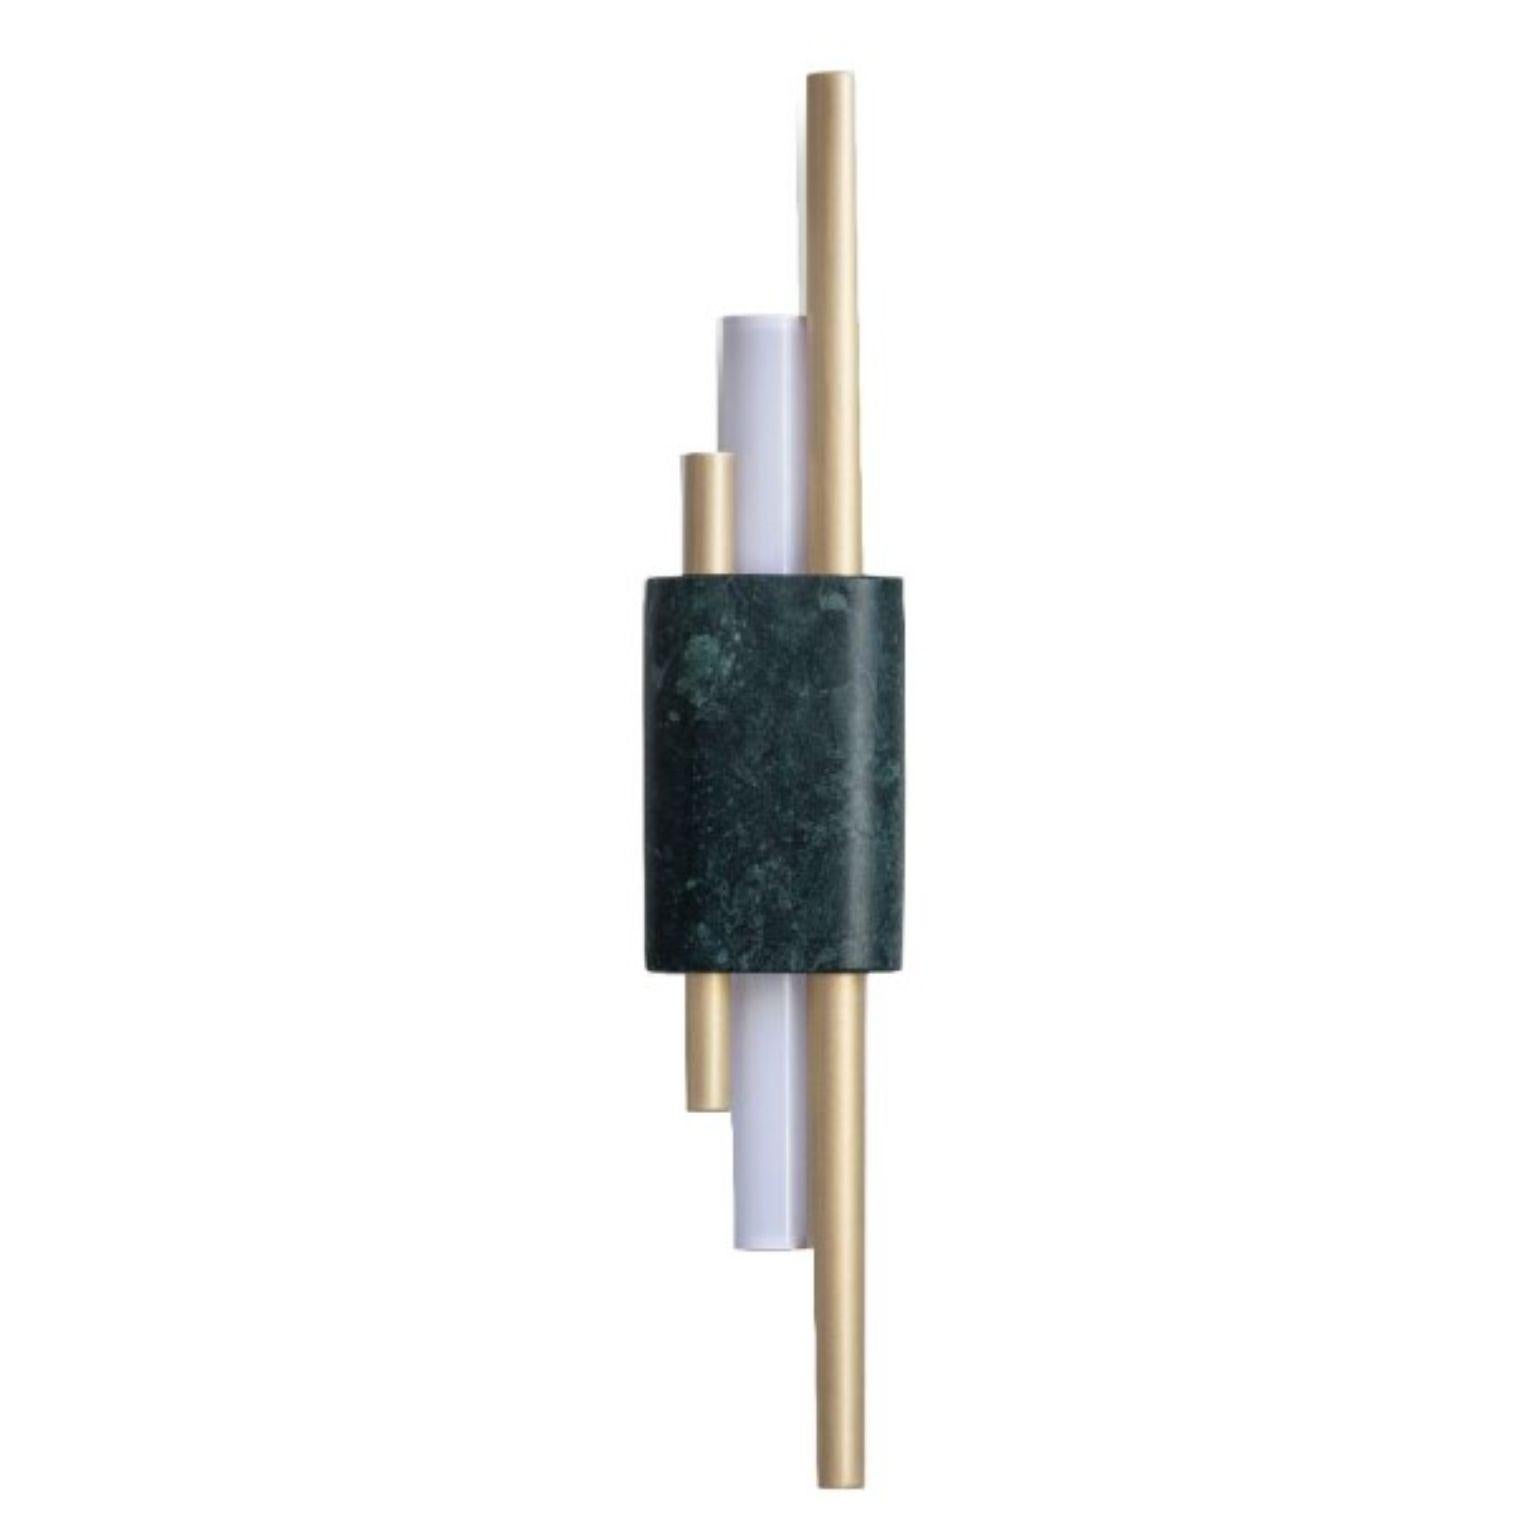 Tanto wall light - large - green by Bert Frank
Dimensions: 65 x 9 x 9 cm
Materials: Brushed brass, green guatemala marble

When Adam Yeats and Robbie Llewellyn founded Bert Frank in 2013 it was a meeting of minds and the start of a collaborative